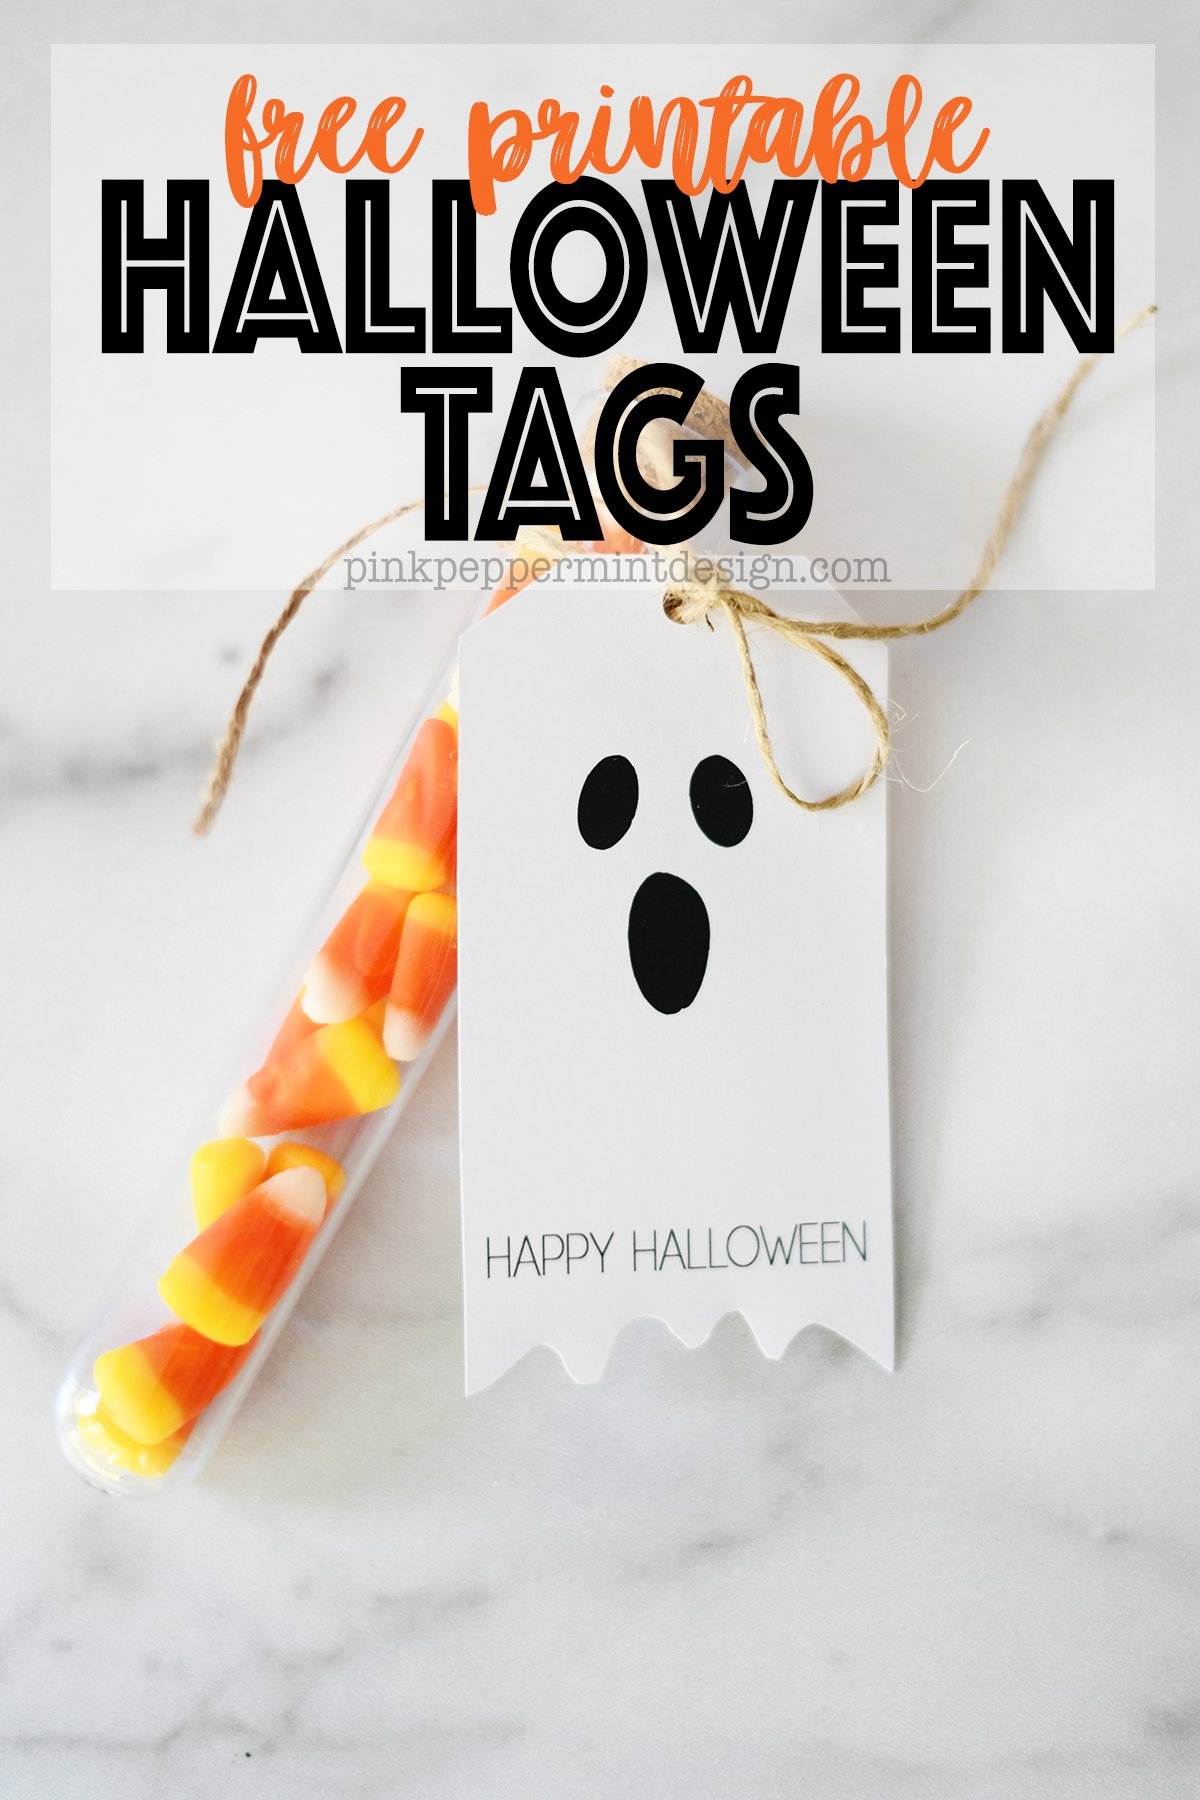 Adorable Free Printable Halloween Tags Ghosts Pink Peppermint Design